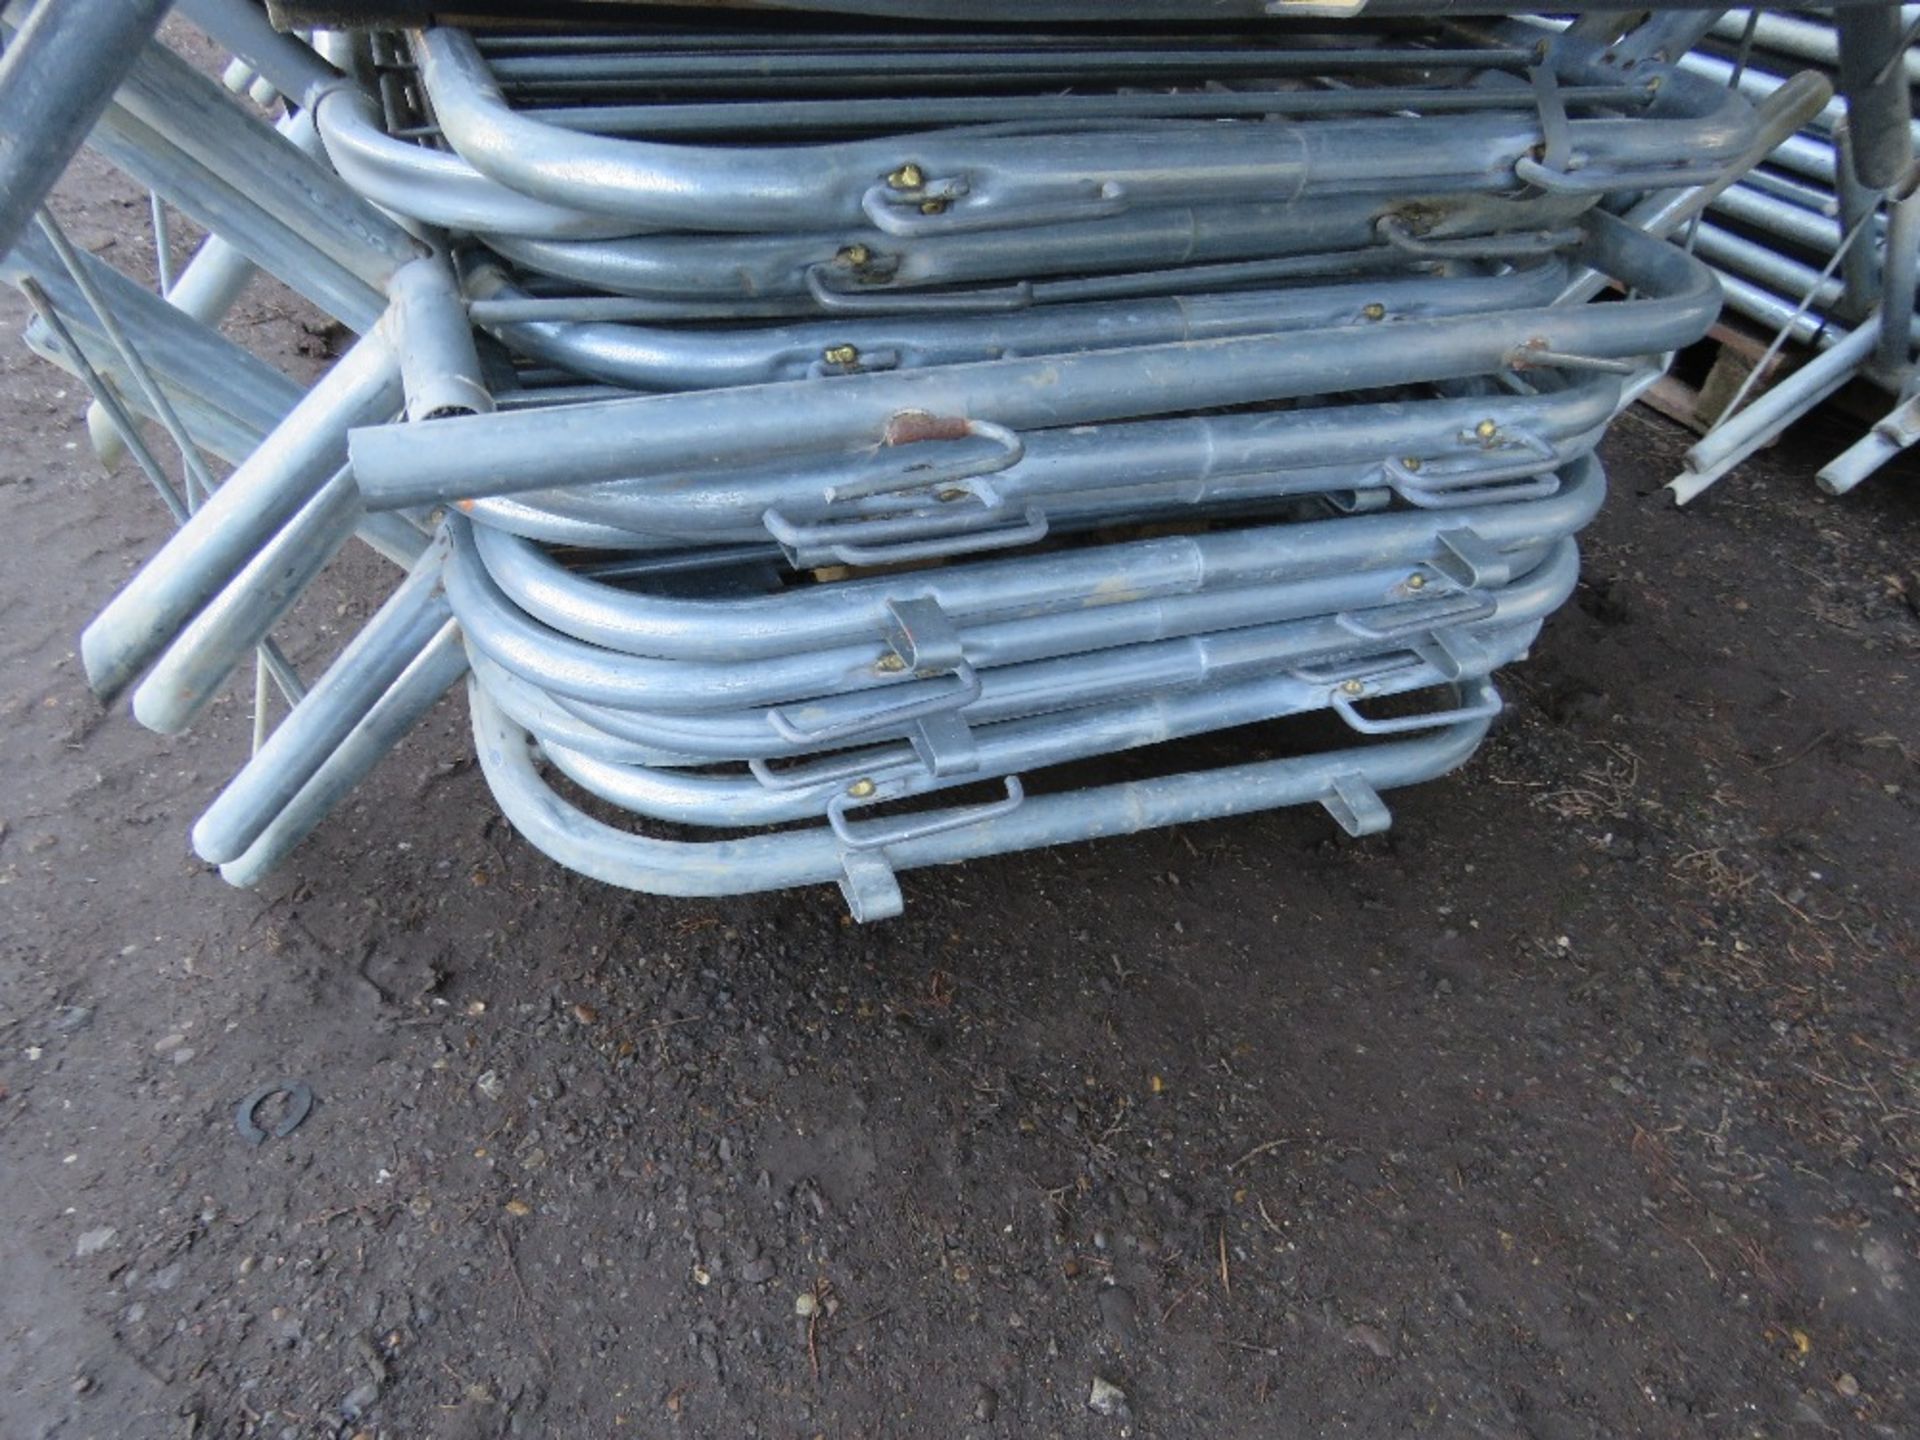 BUNDLE CONTAINING 15NO QUALITY GALVANISED CROWD BARRIERS, MAINLY SMARTWELD BRAND. MANY APPEAR UNUSED - Image 2 of 2